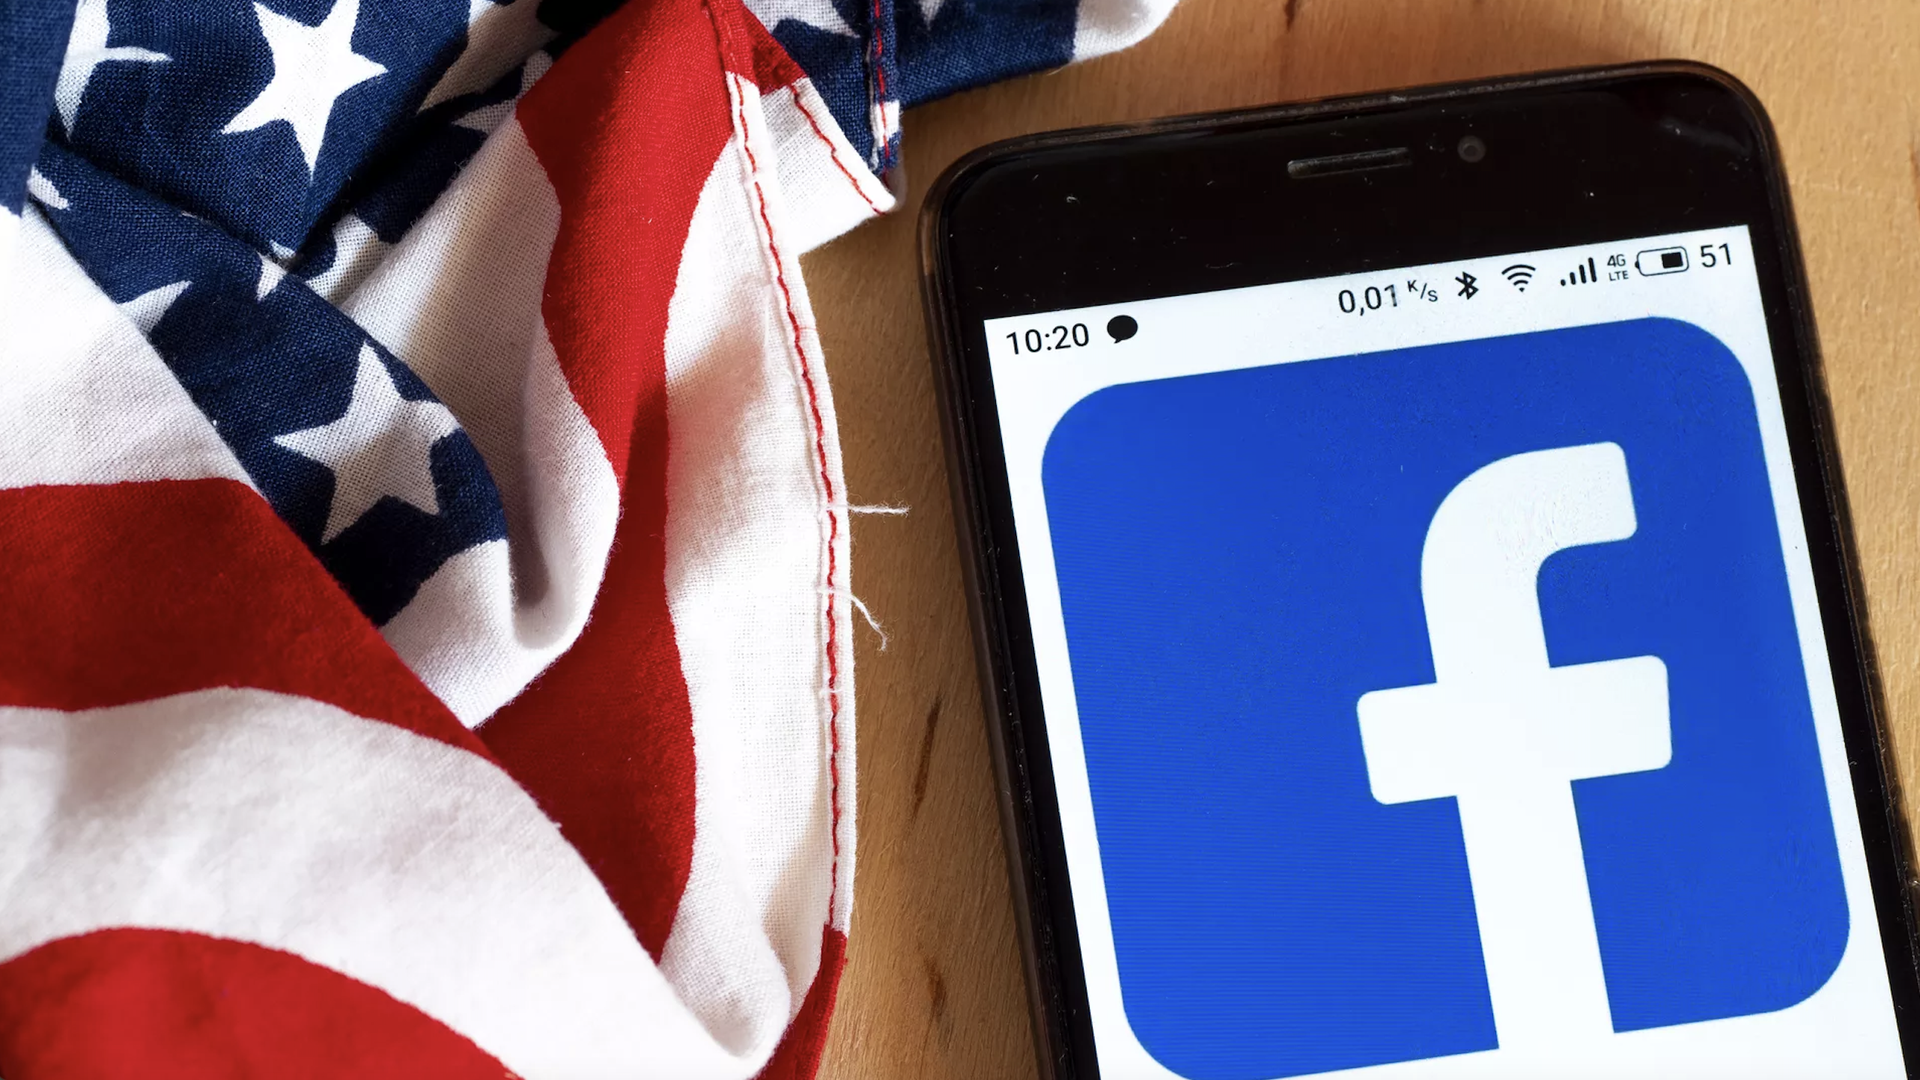 An illustration of the Facebook logo on a smartphone next to an American flag.